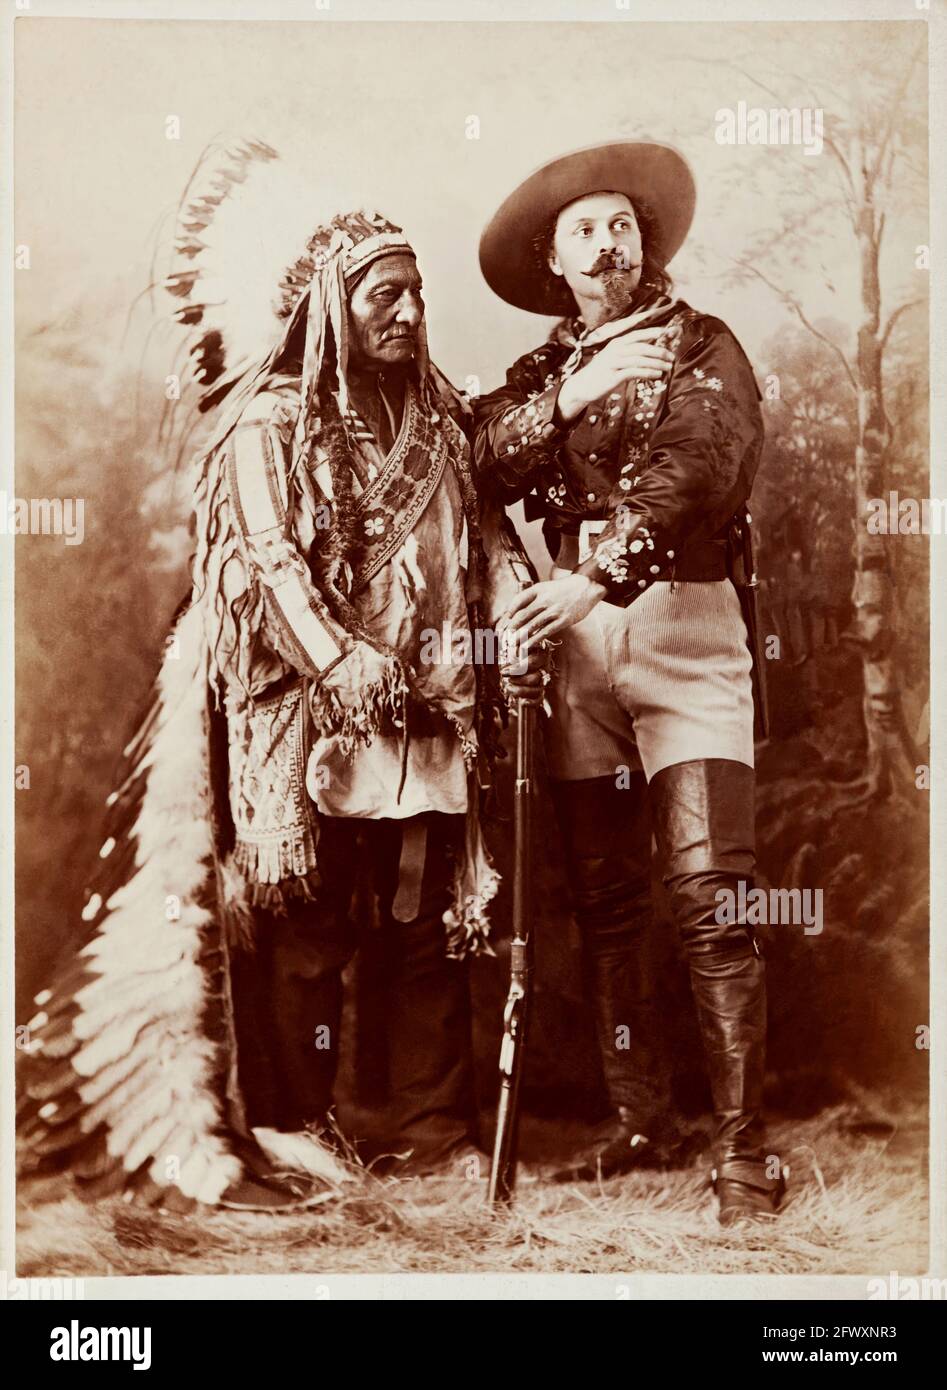 1880 ca , Montreal , CANADA : The celebrated Colonel William Frederick CODY  , know as BUFFALO BILL ( 1846 - 1917 ) with Chef SITTING BULL ( 1831 - 1890  )